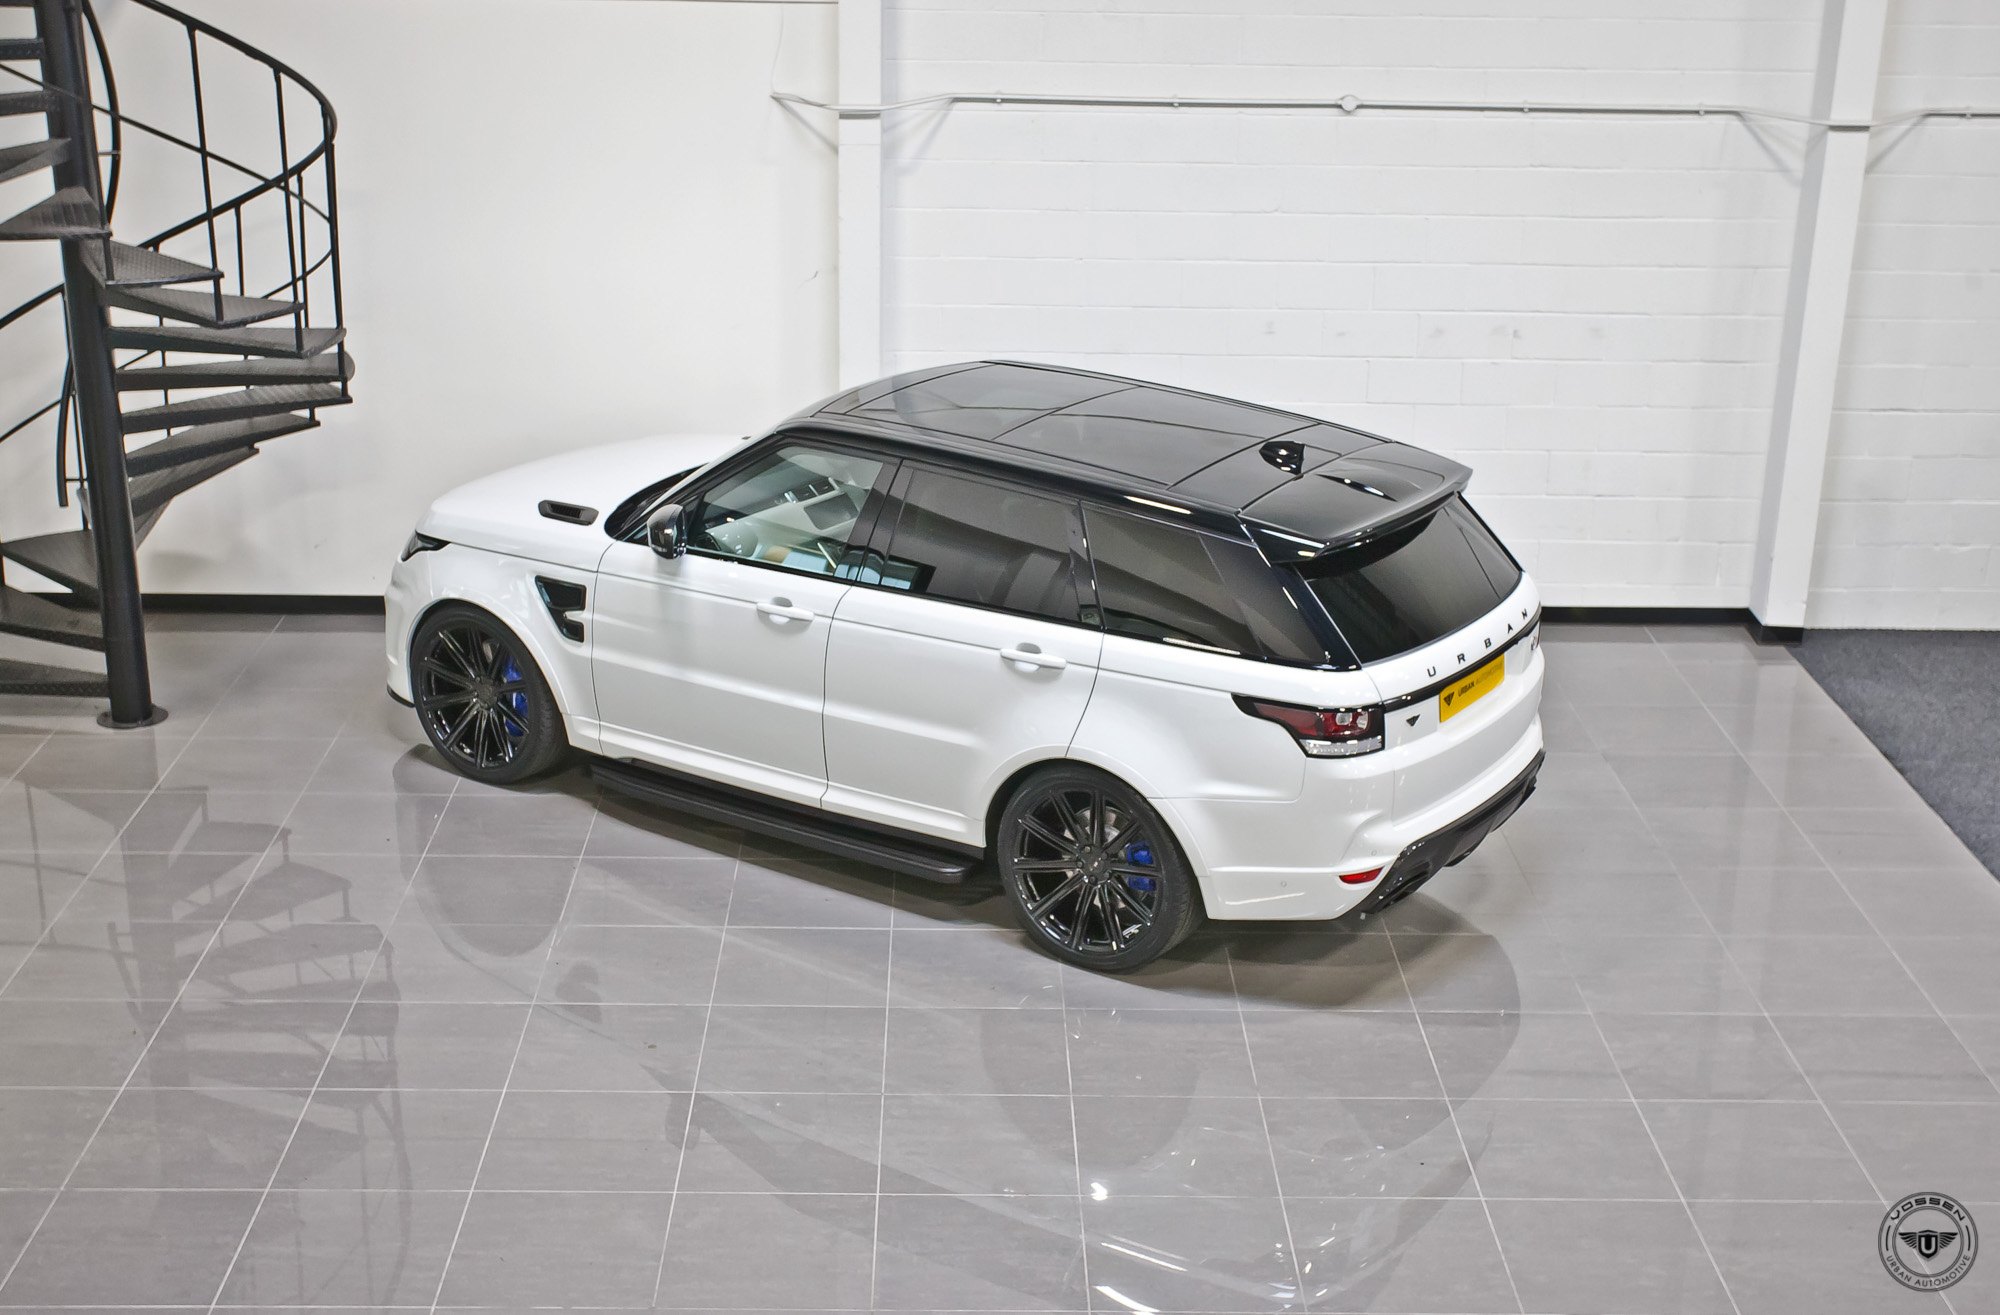 White Range Rover Sport with Black Rear Diffuser - Photo by Vossen